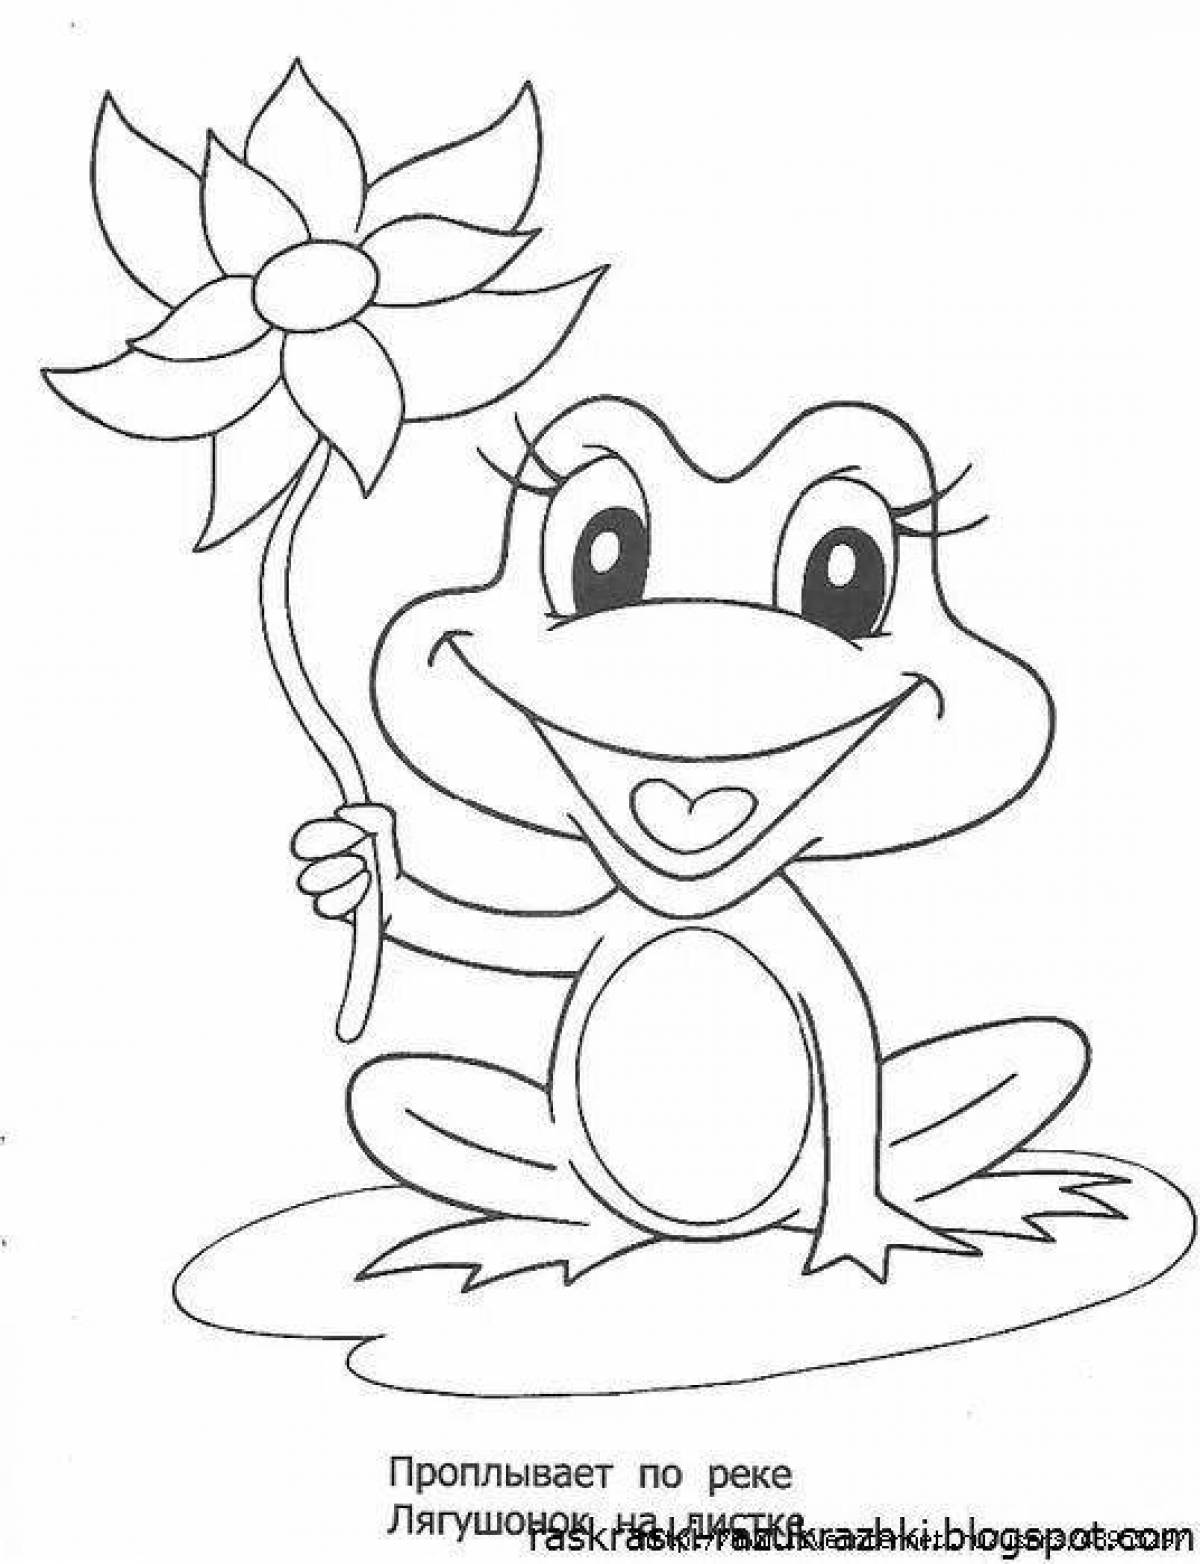 Colored frog coloring book for kids